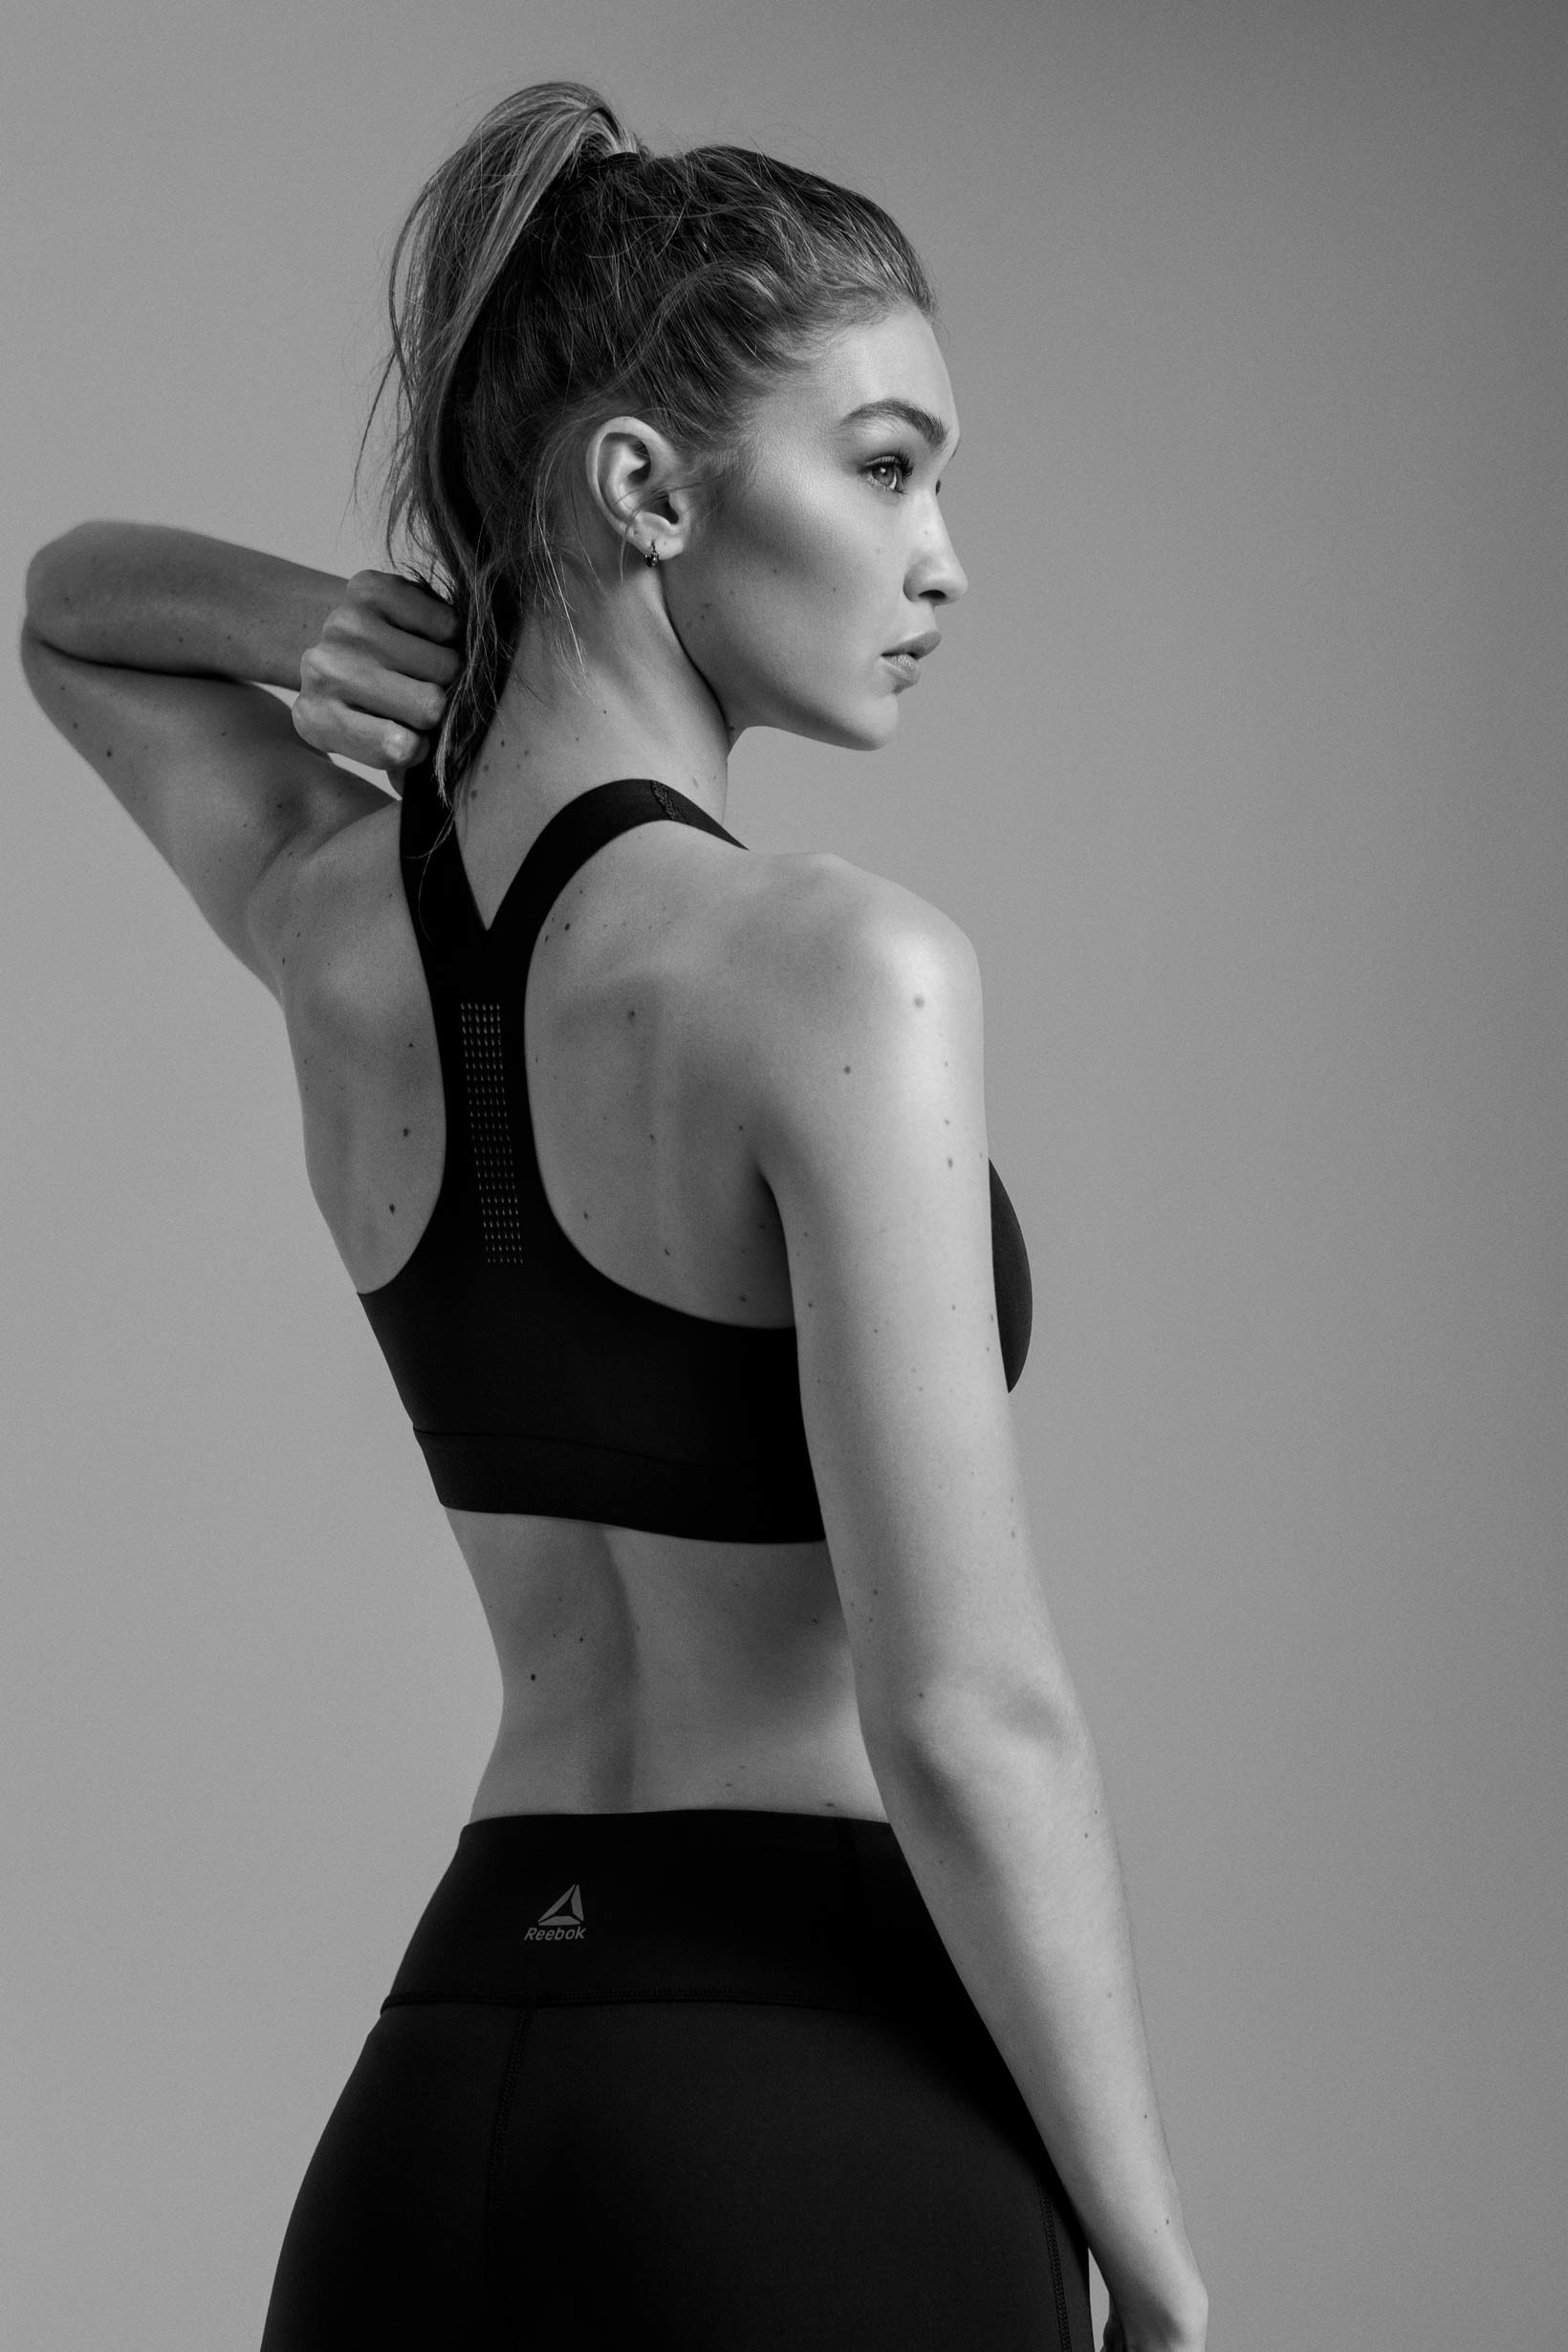 The Reebok PUREMOVE bra is designed with our Motion - Depop